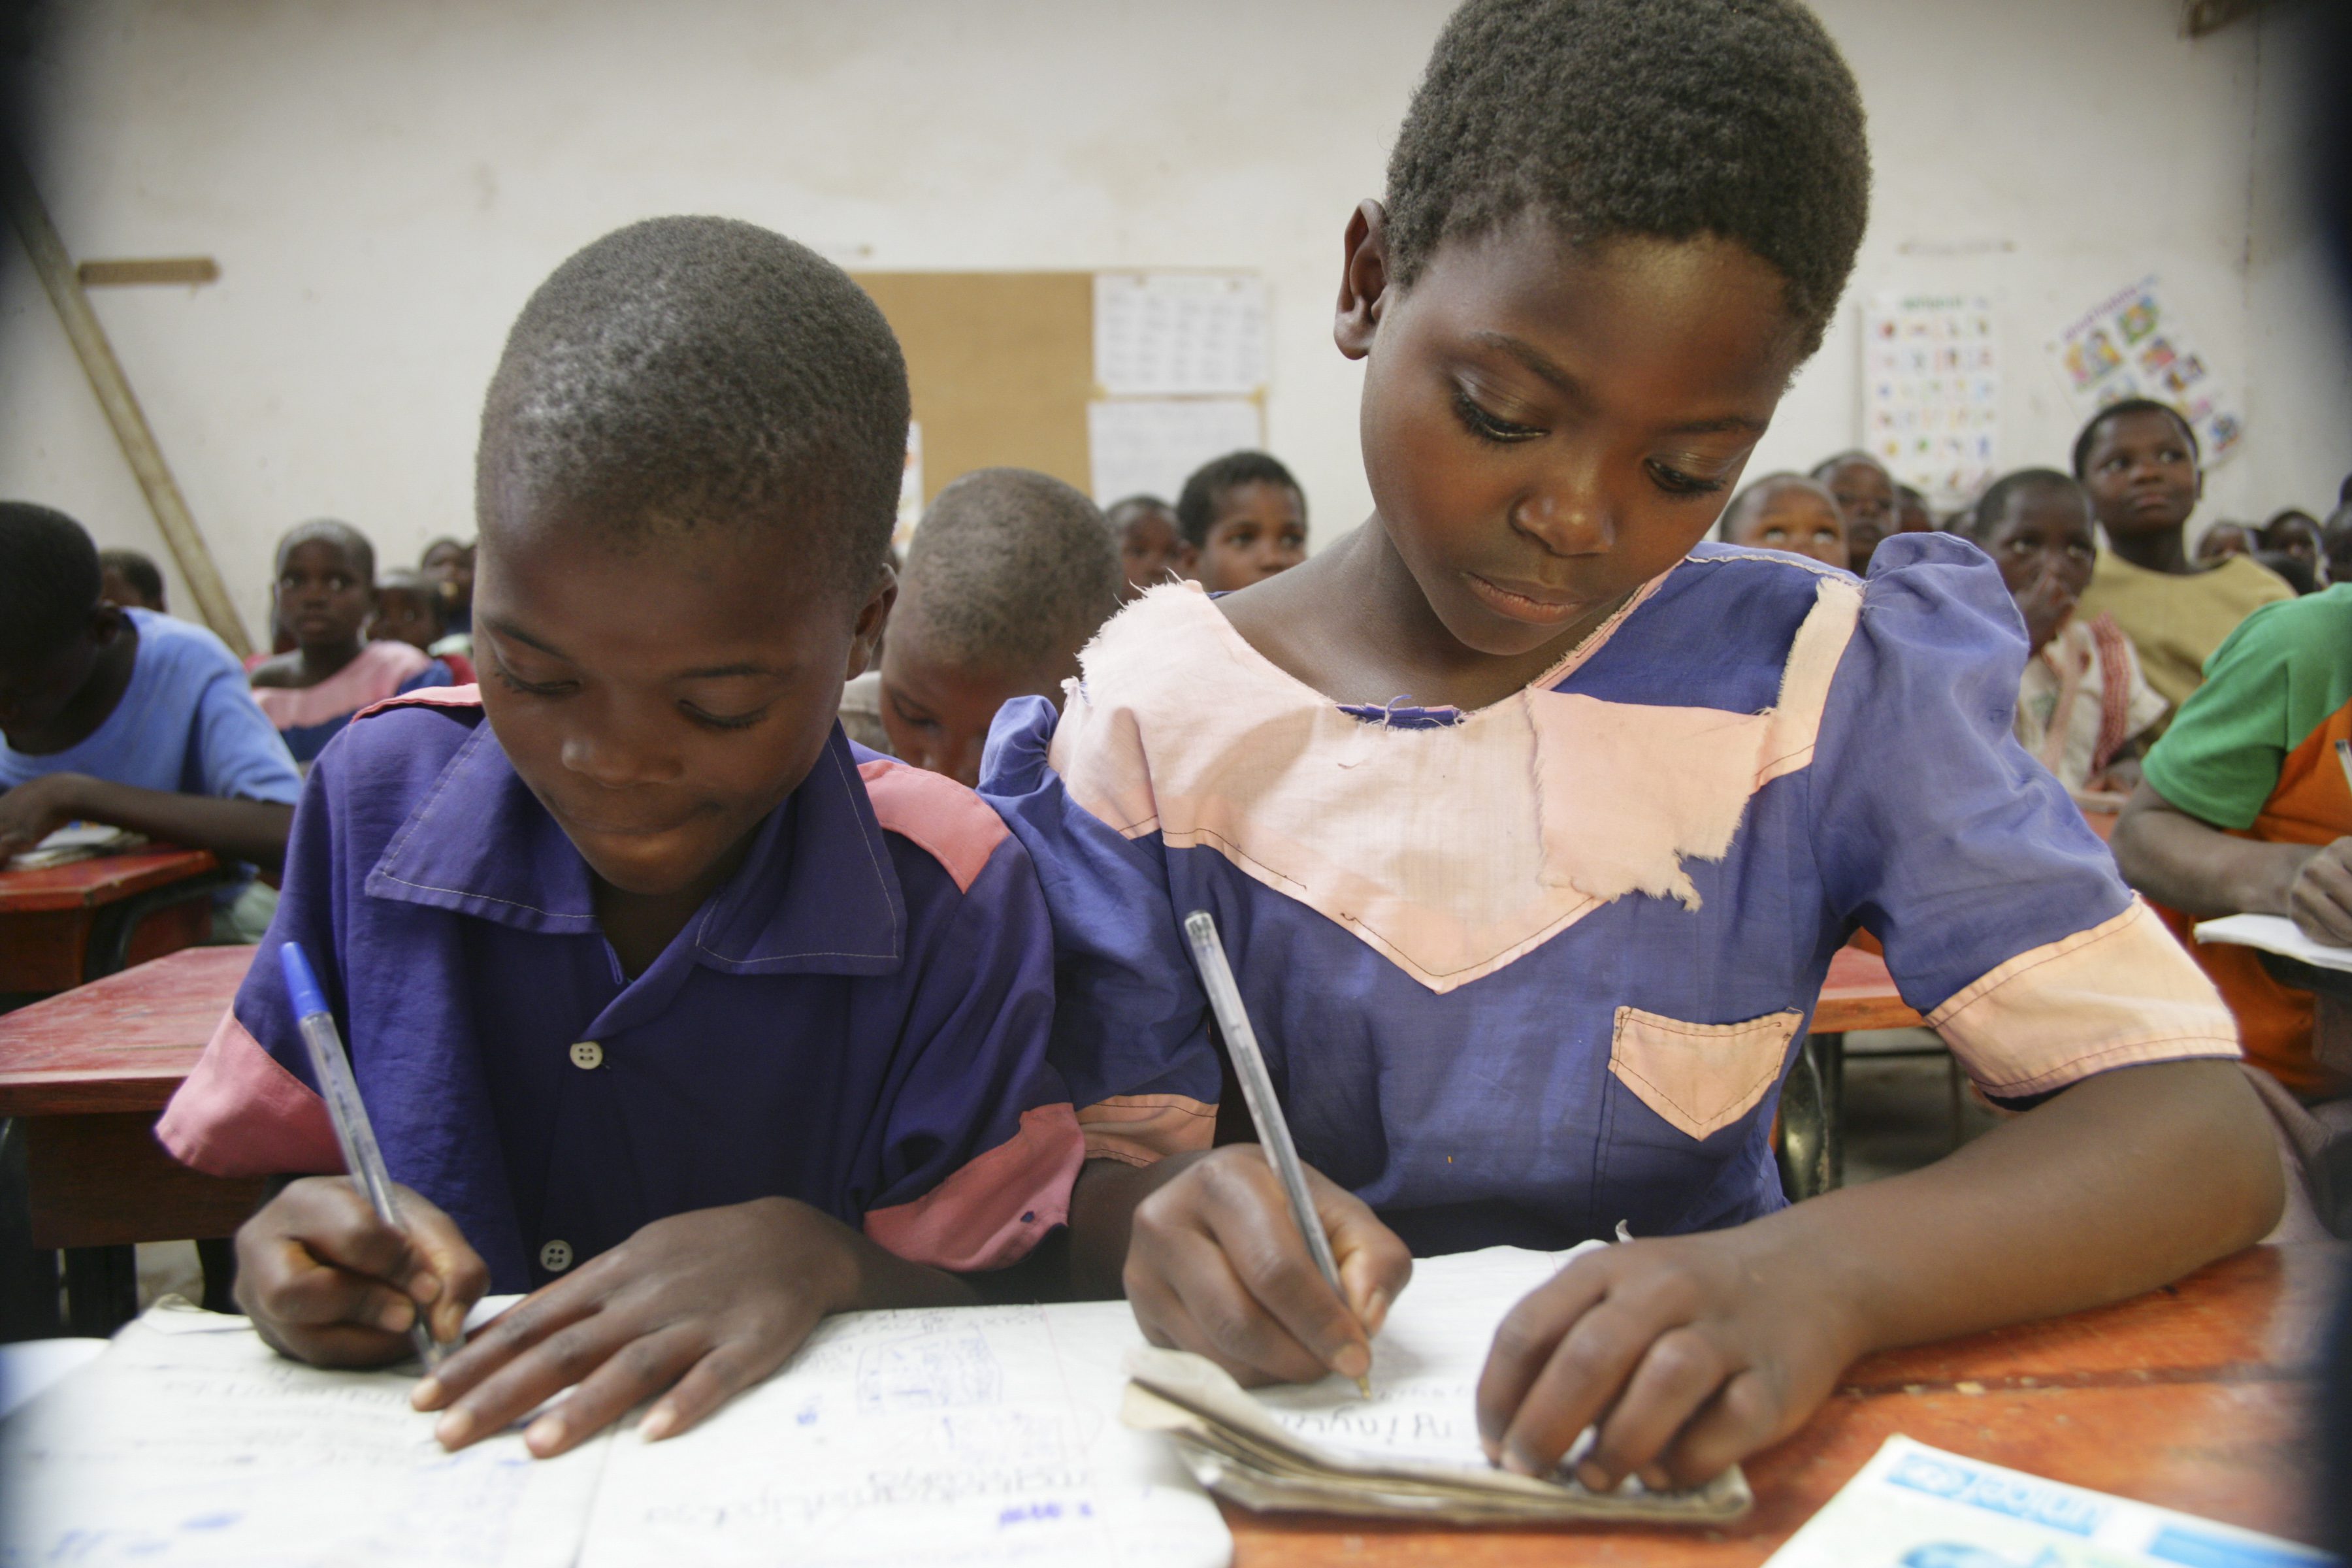 Can unconventional schooling techniques reduce drop-out rates in Sub-Saharan Africa?